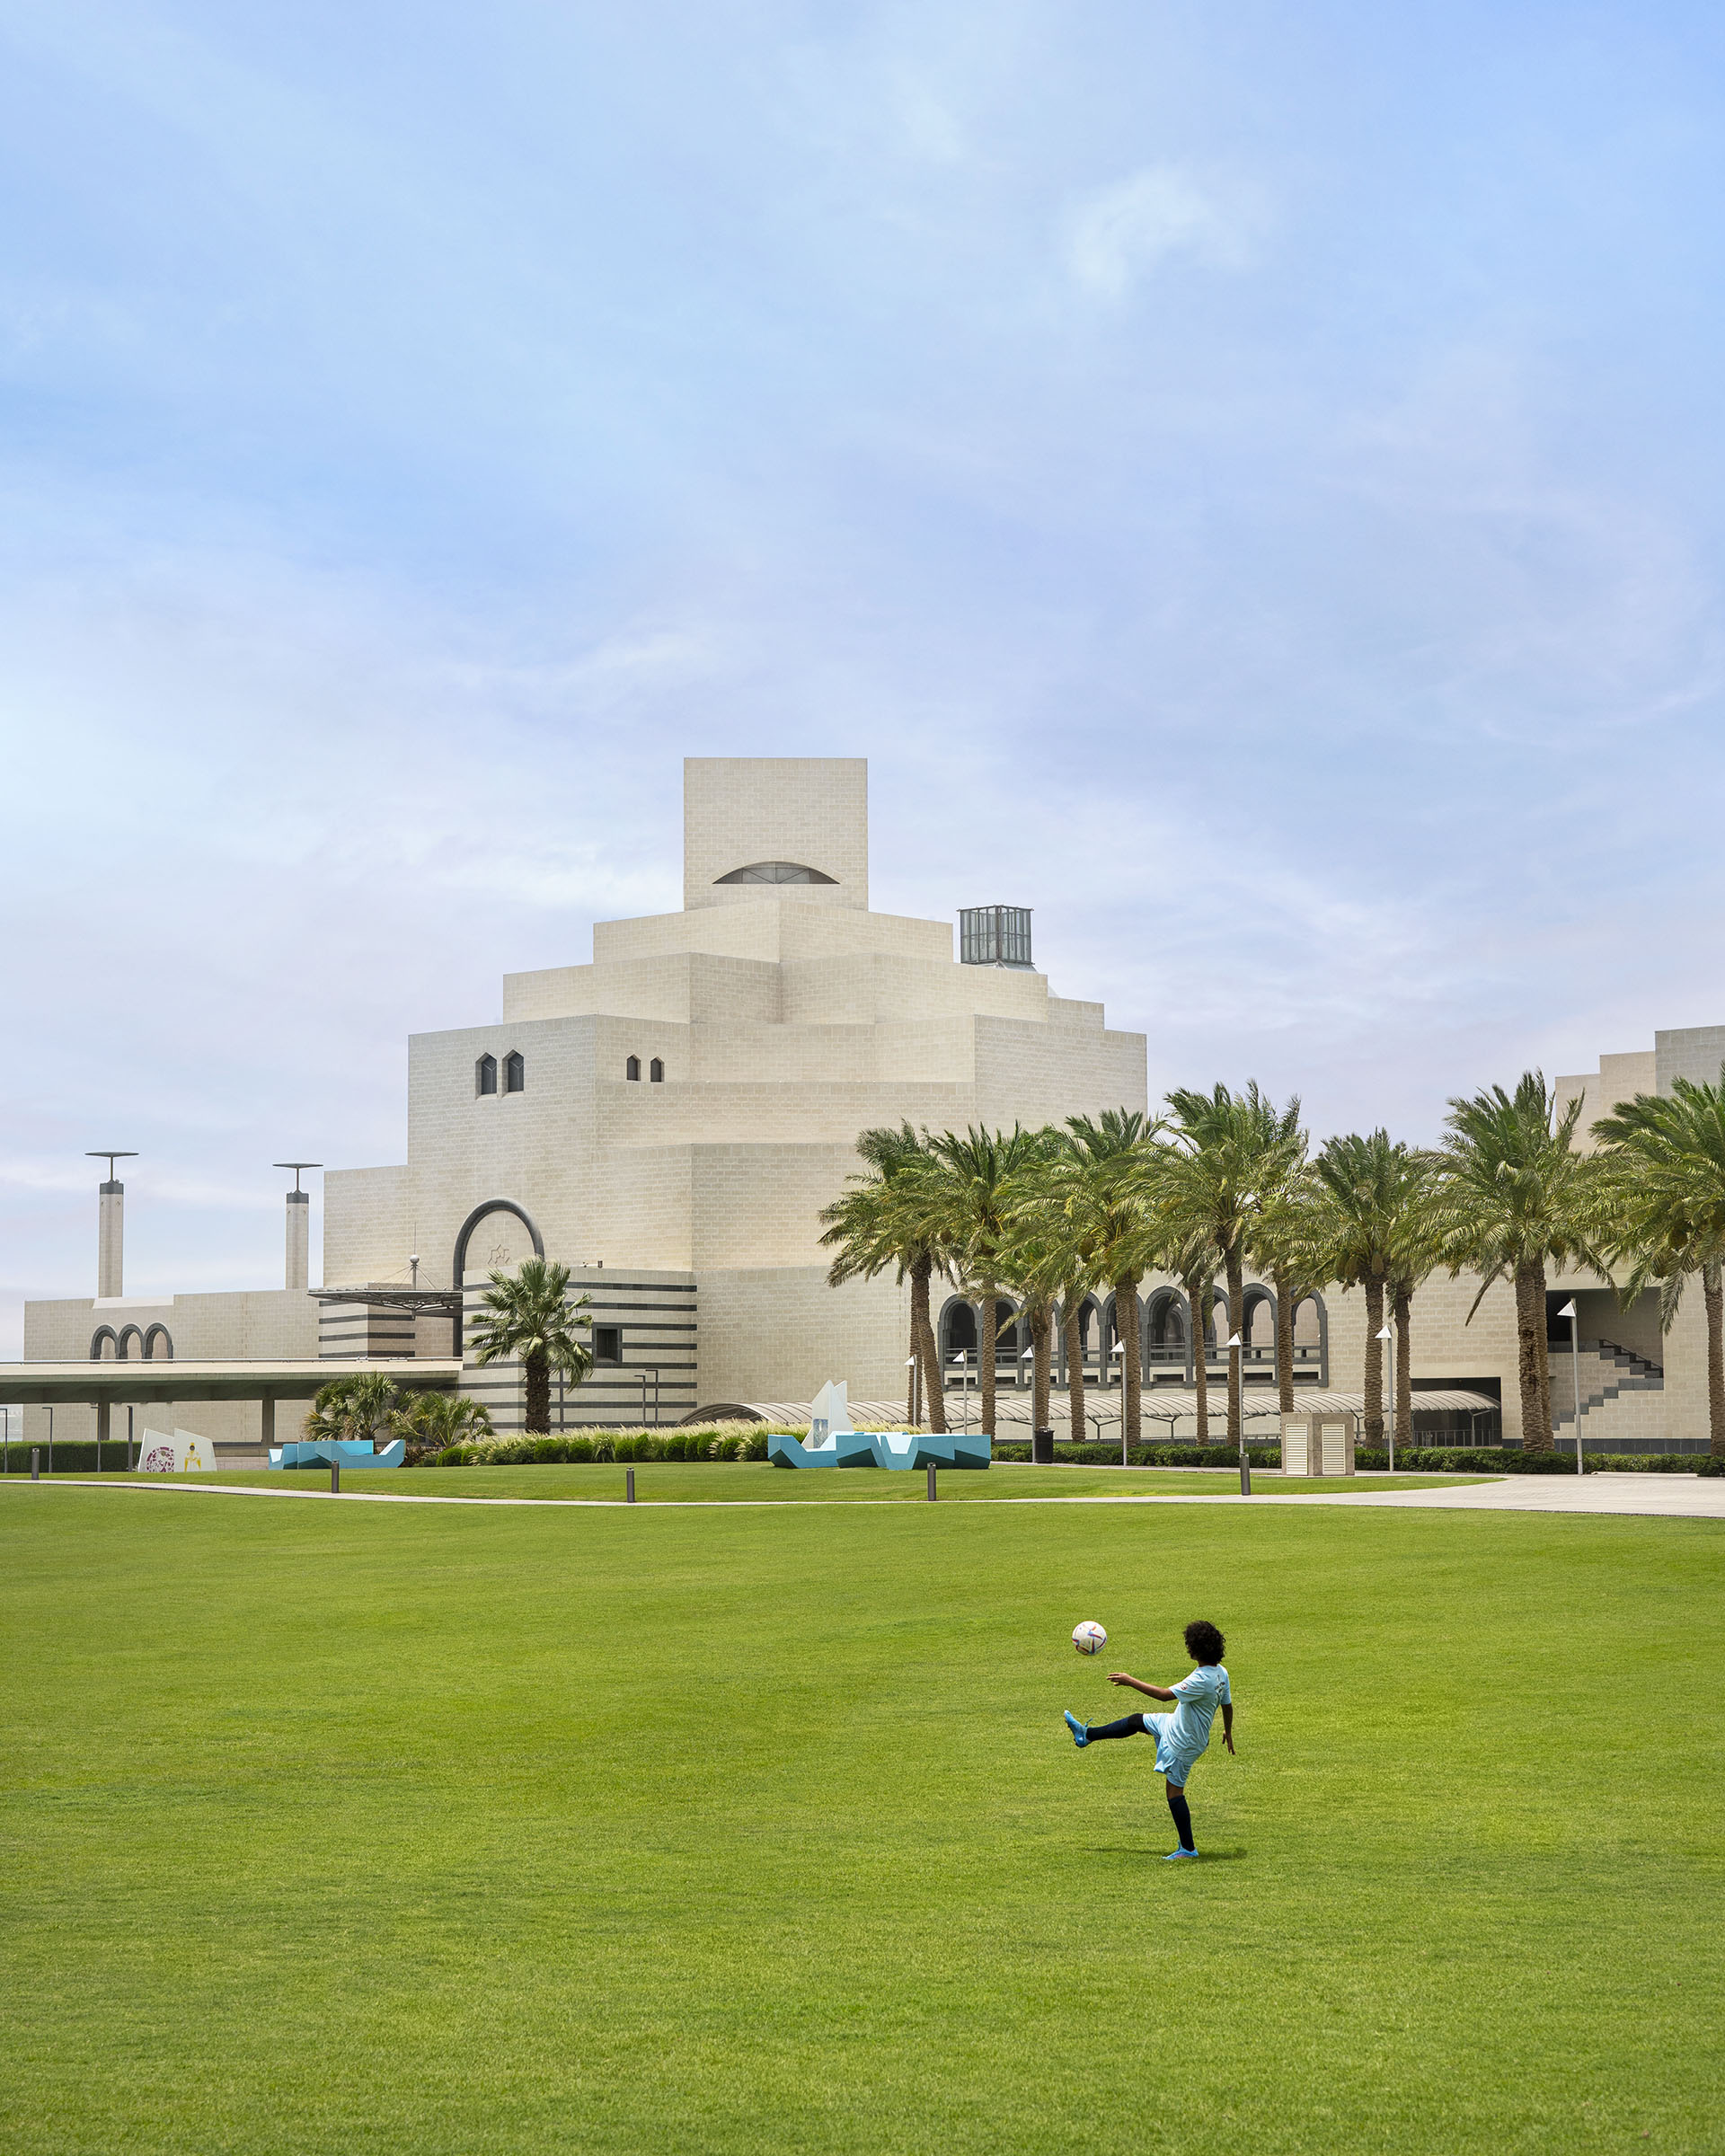 The Museum of Islamic Art in Doha, Qatar. (Photograph by Sara Al Obaidly for TIME)